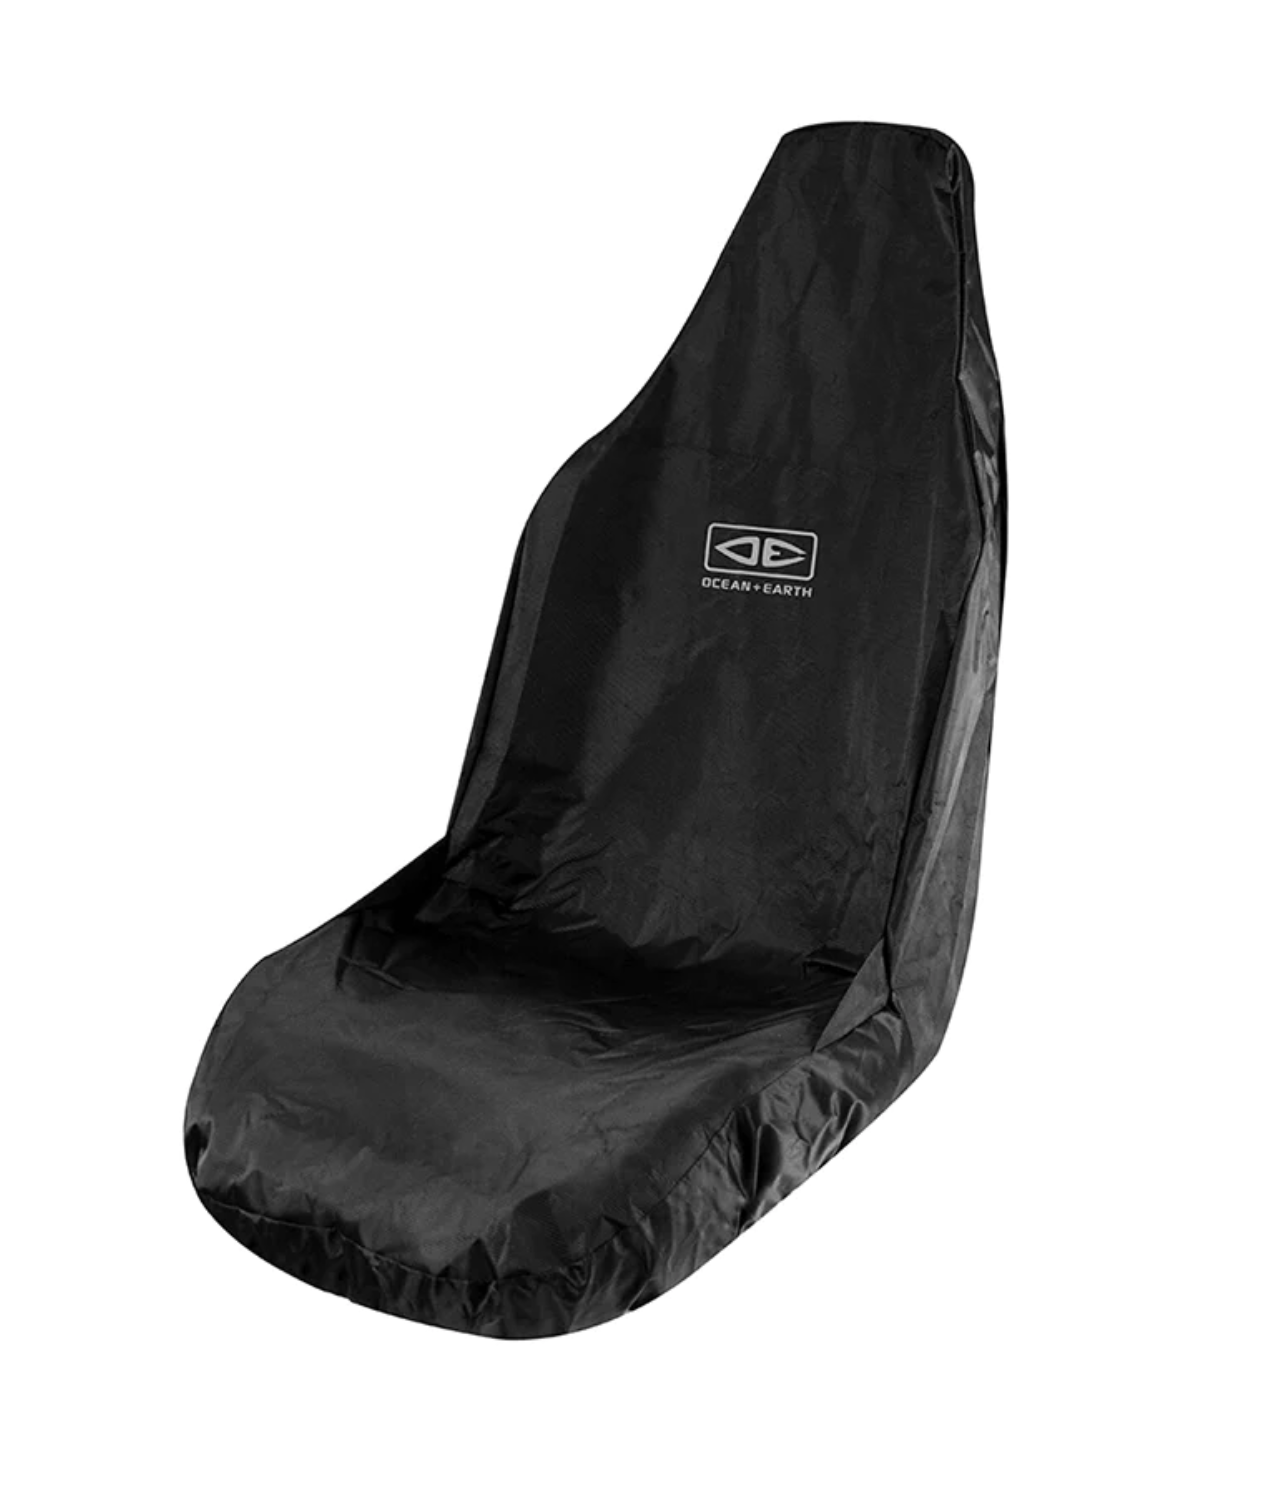 DRY SEAT COVER